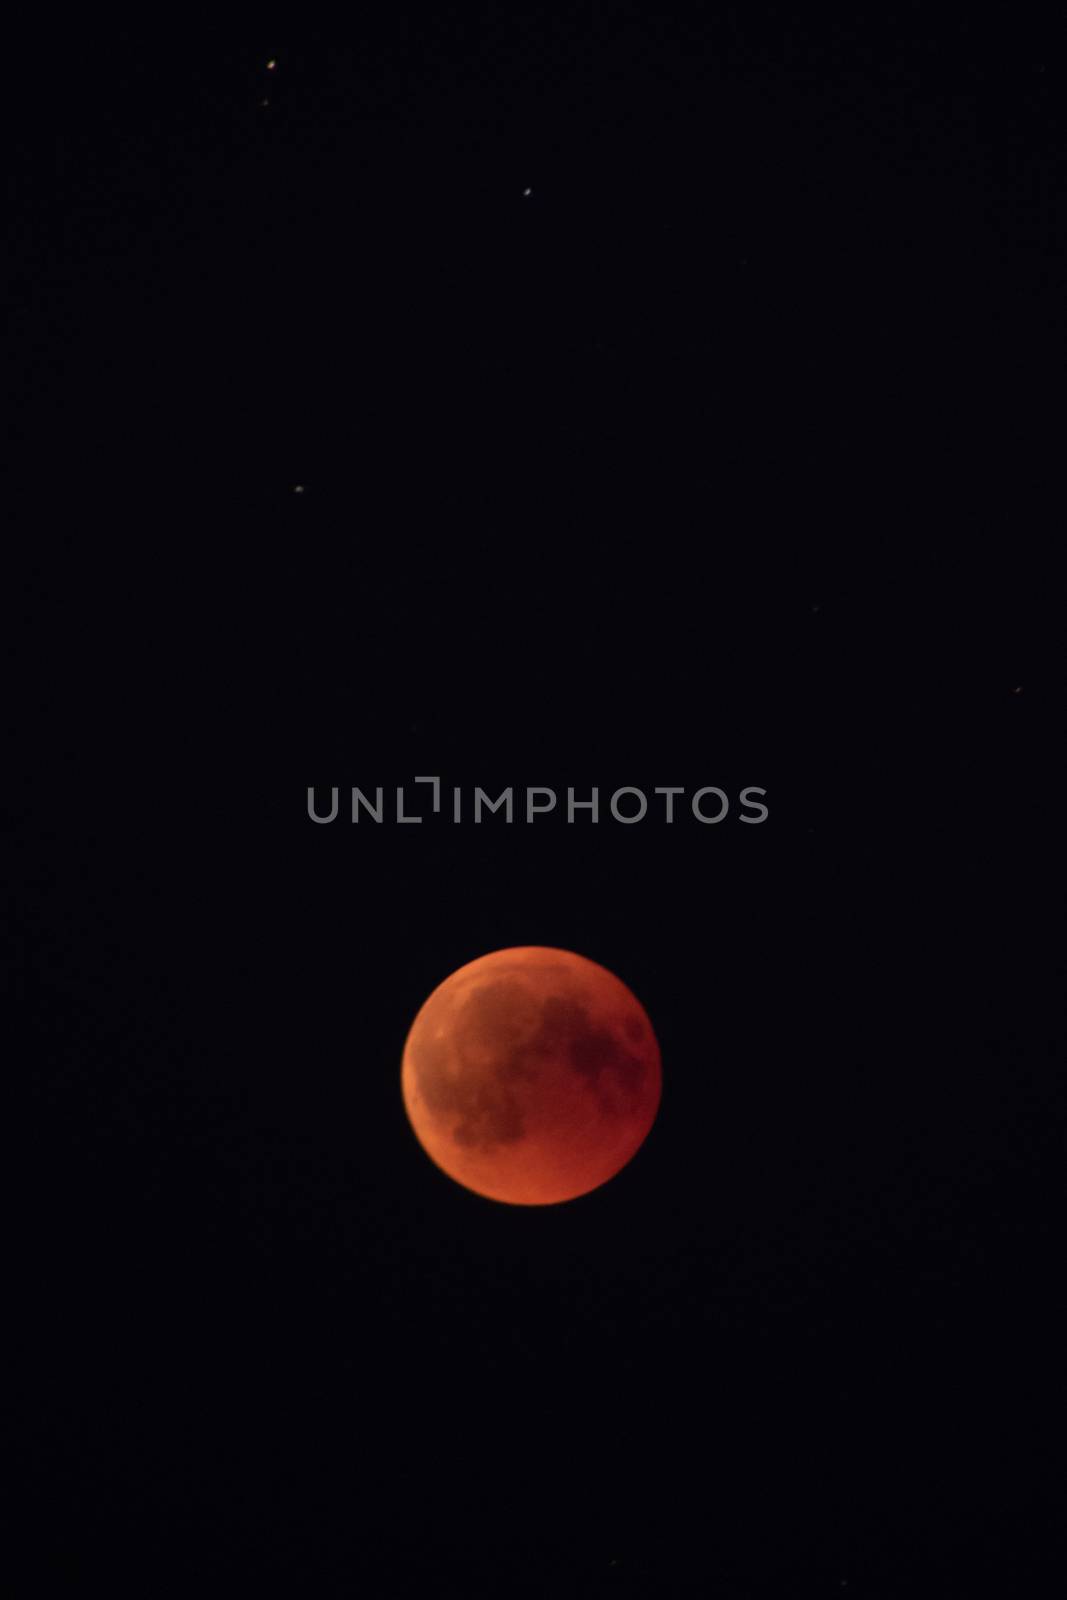 Blood moon at its most red moment in black night